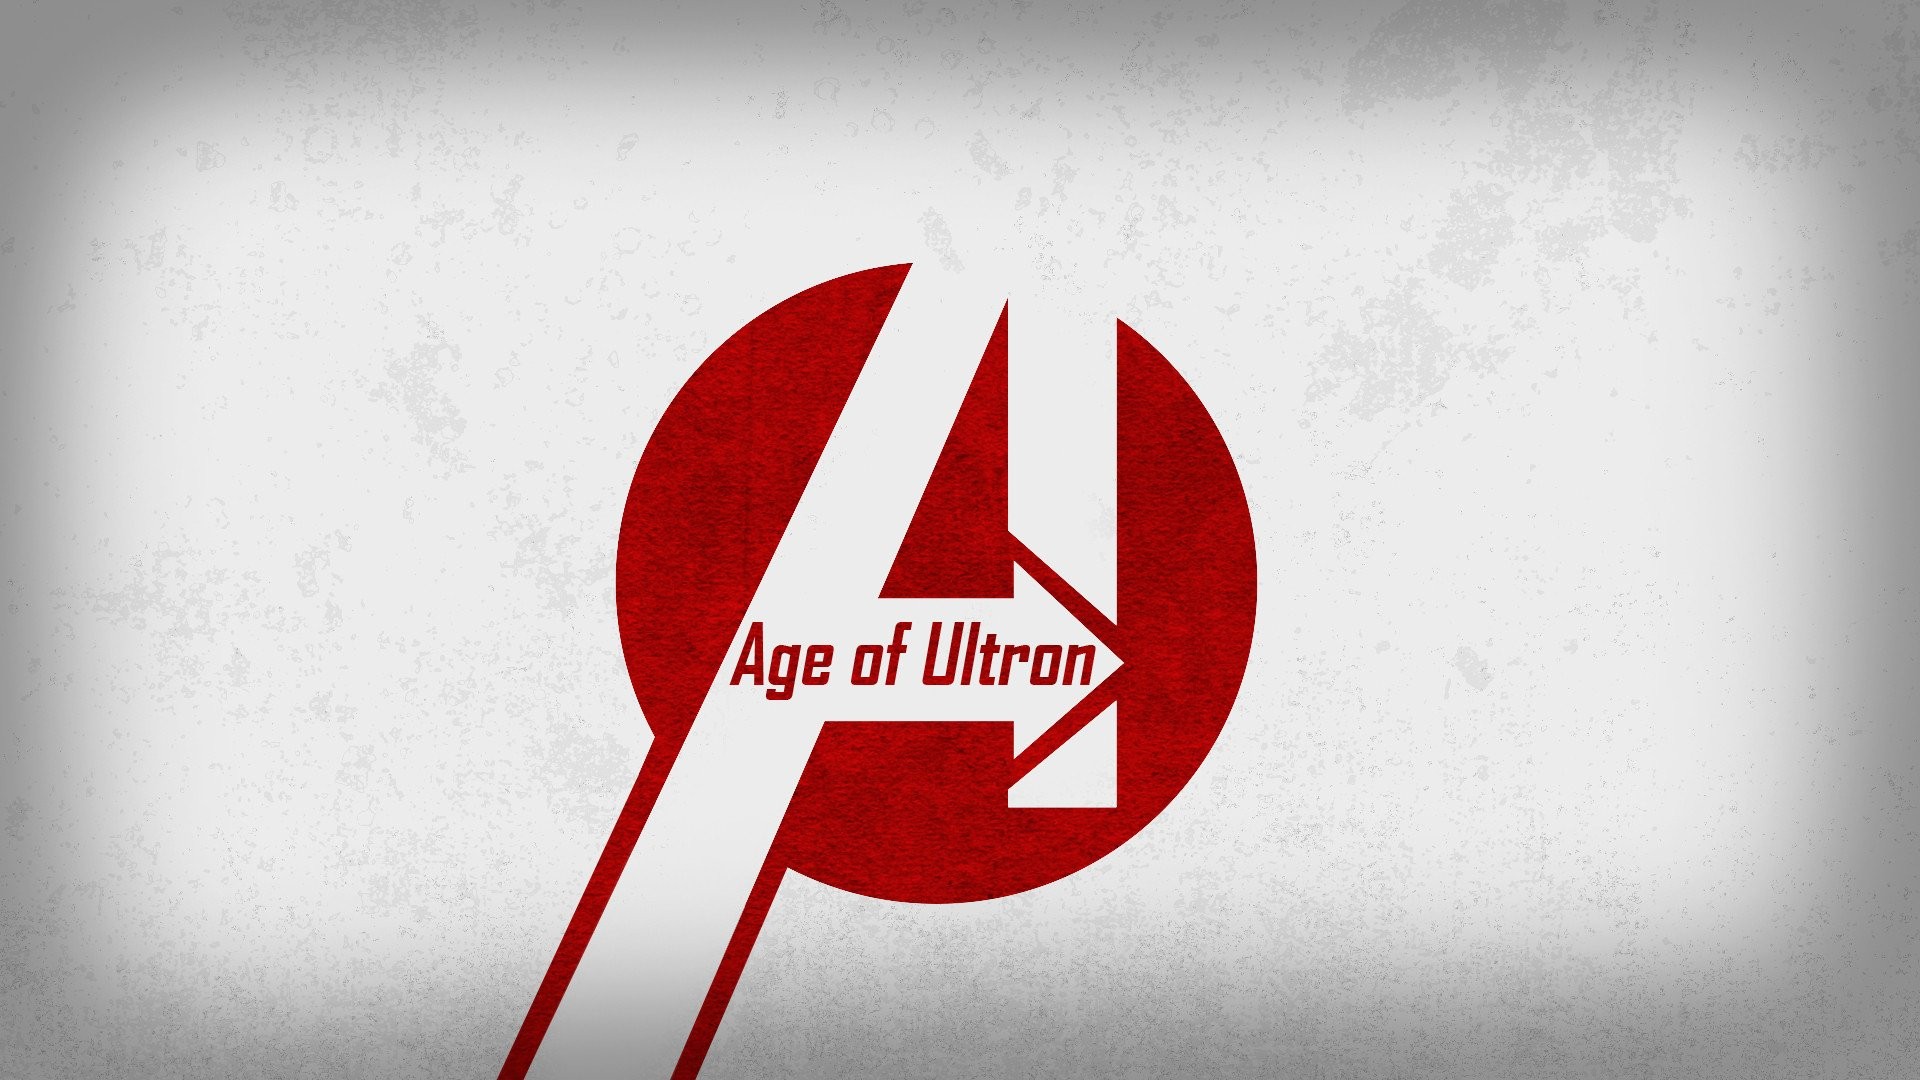 General 1920x1080 The Avengers Avengers: Age of Ultron Marvel Comics artwork simple background